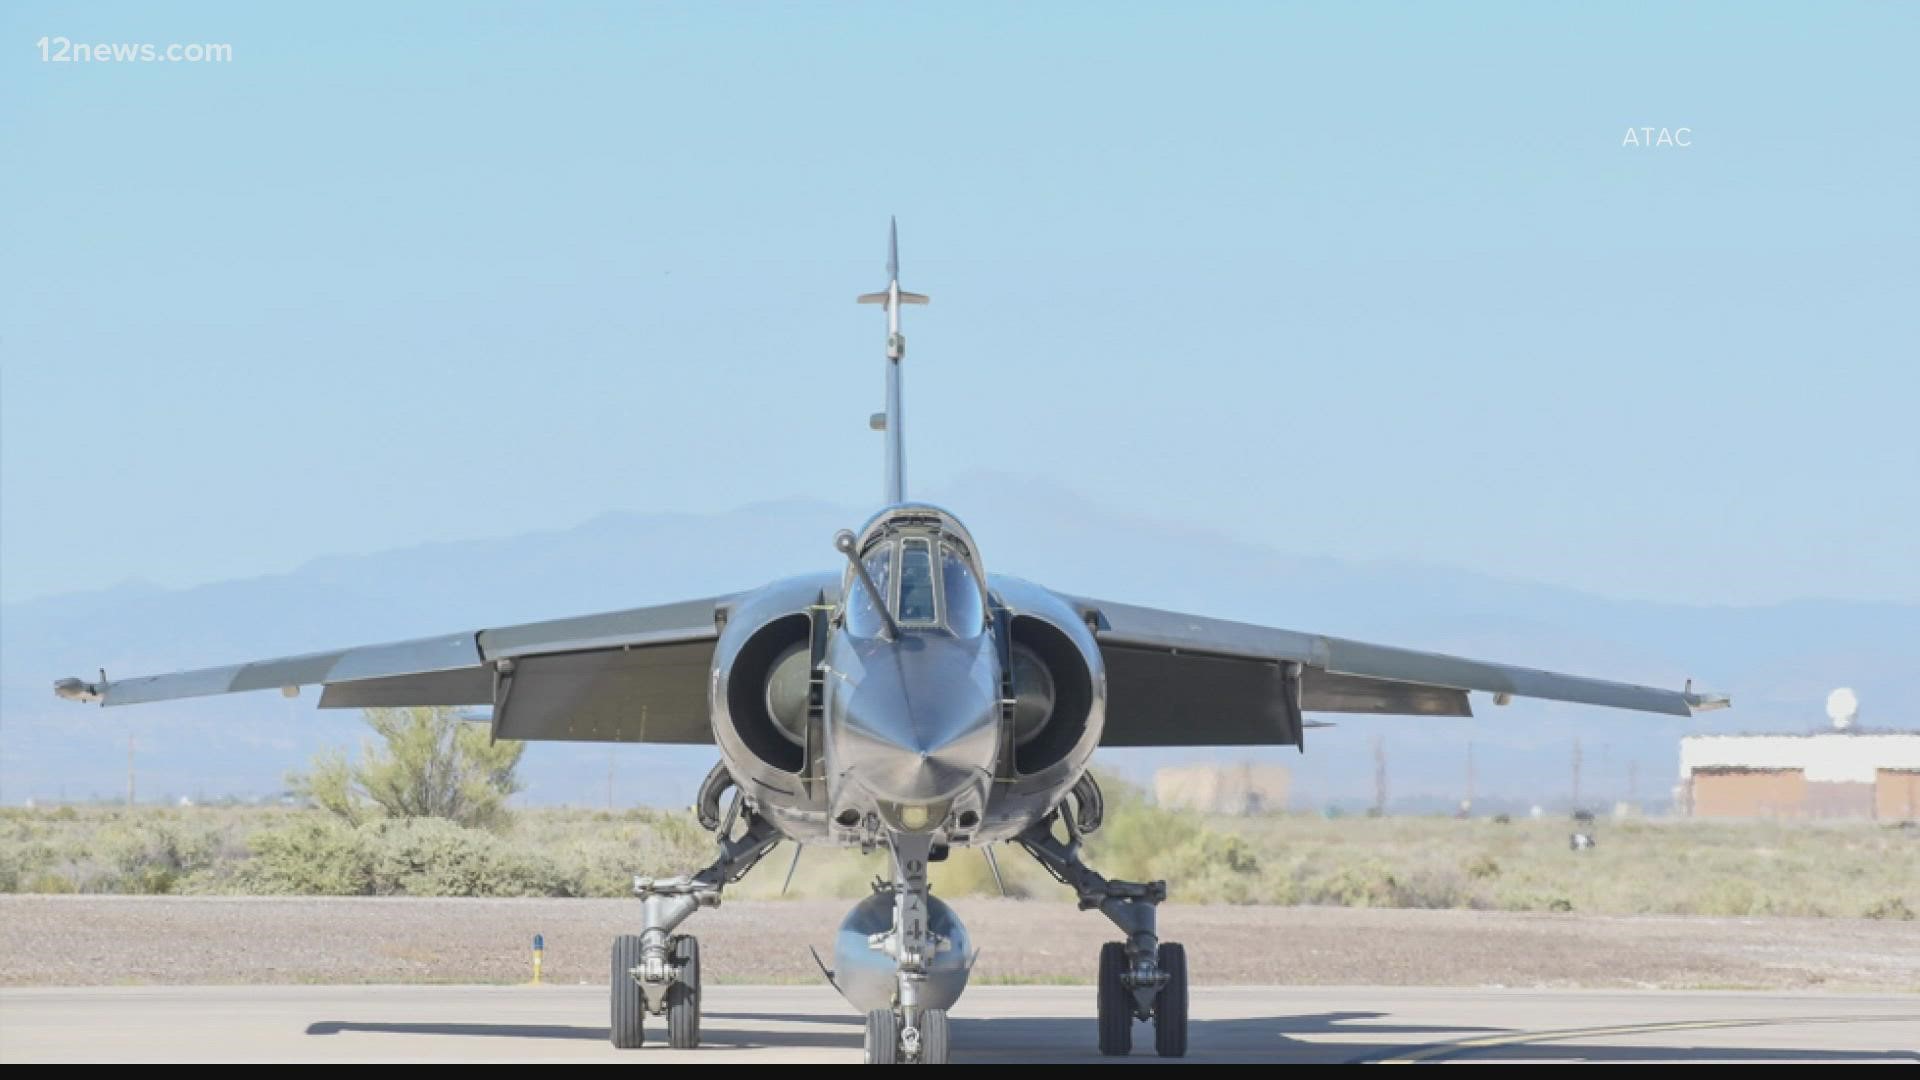 The Mirage F1 fighter plane was part of a contractor's fleet of planes that train Luke Air Force Base pilots.